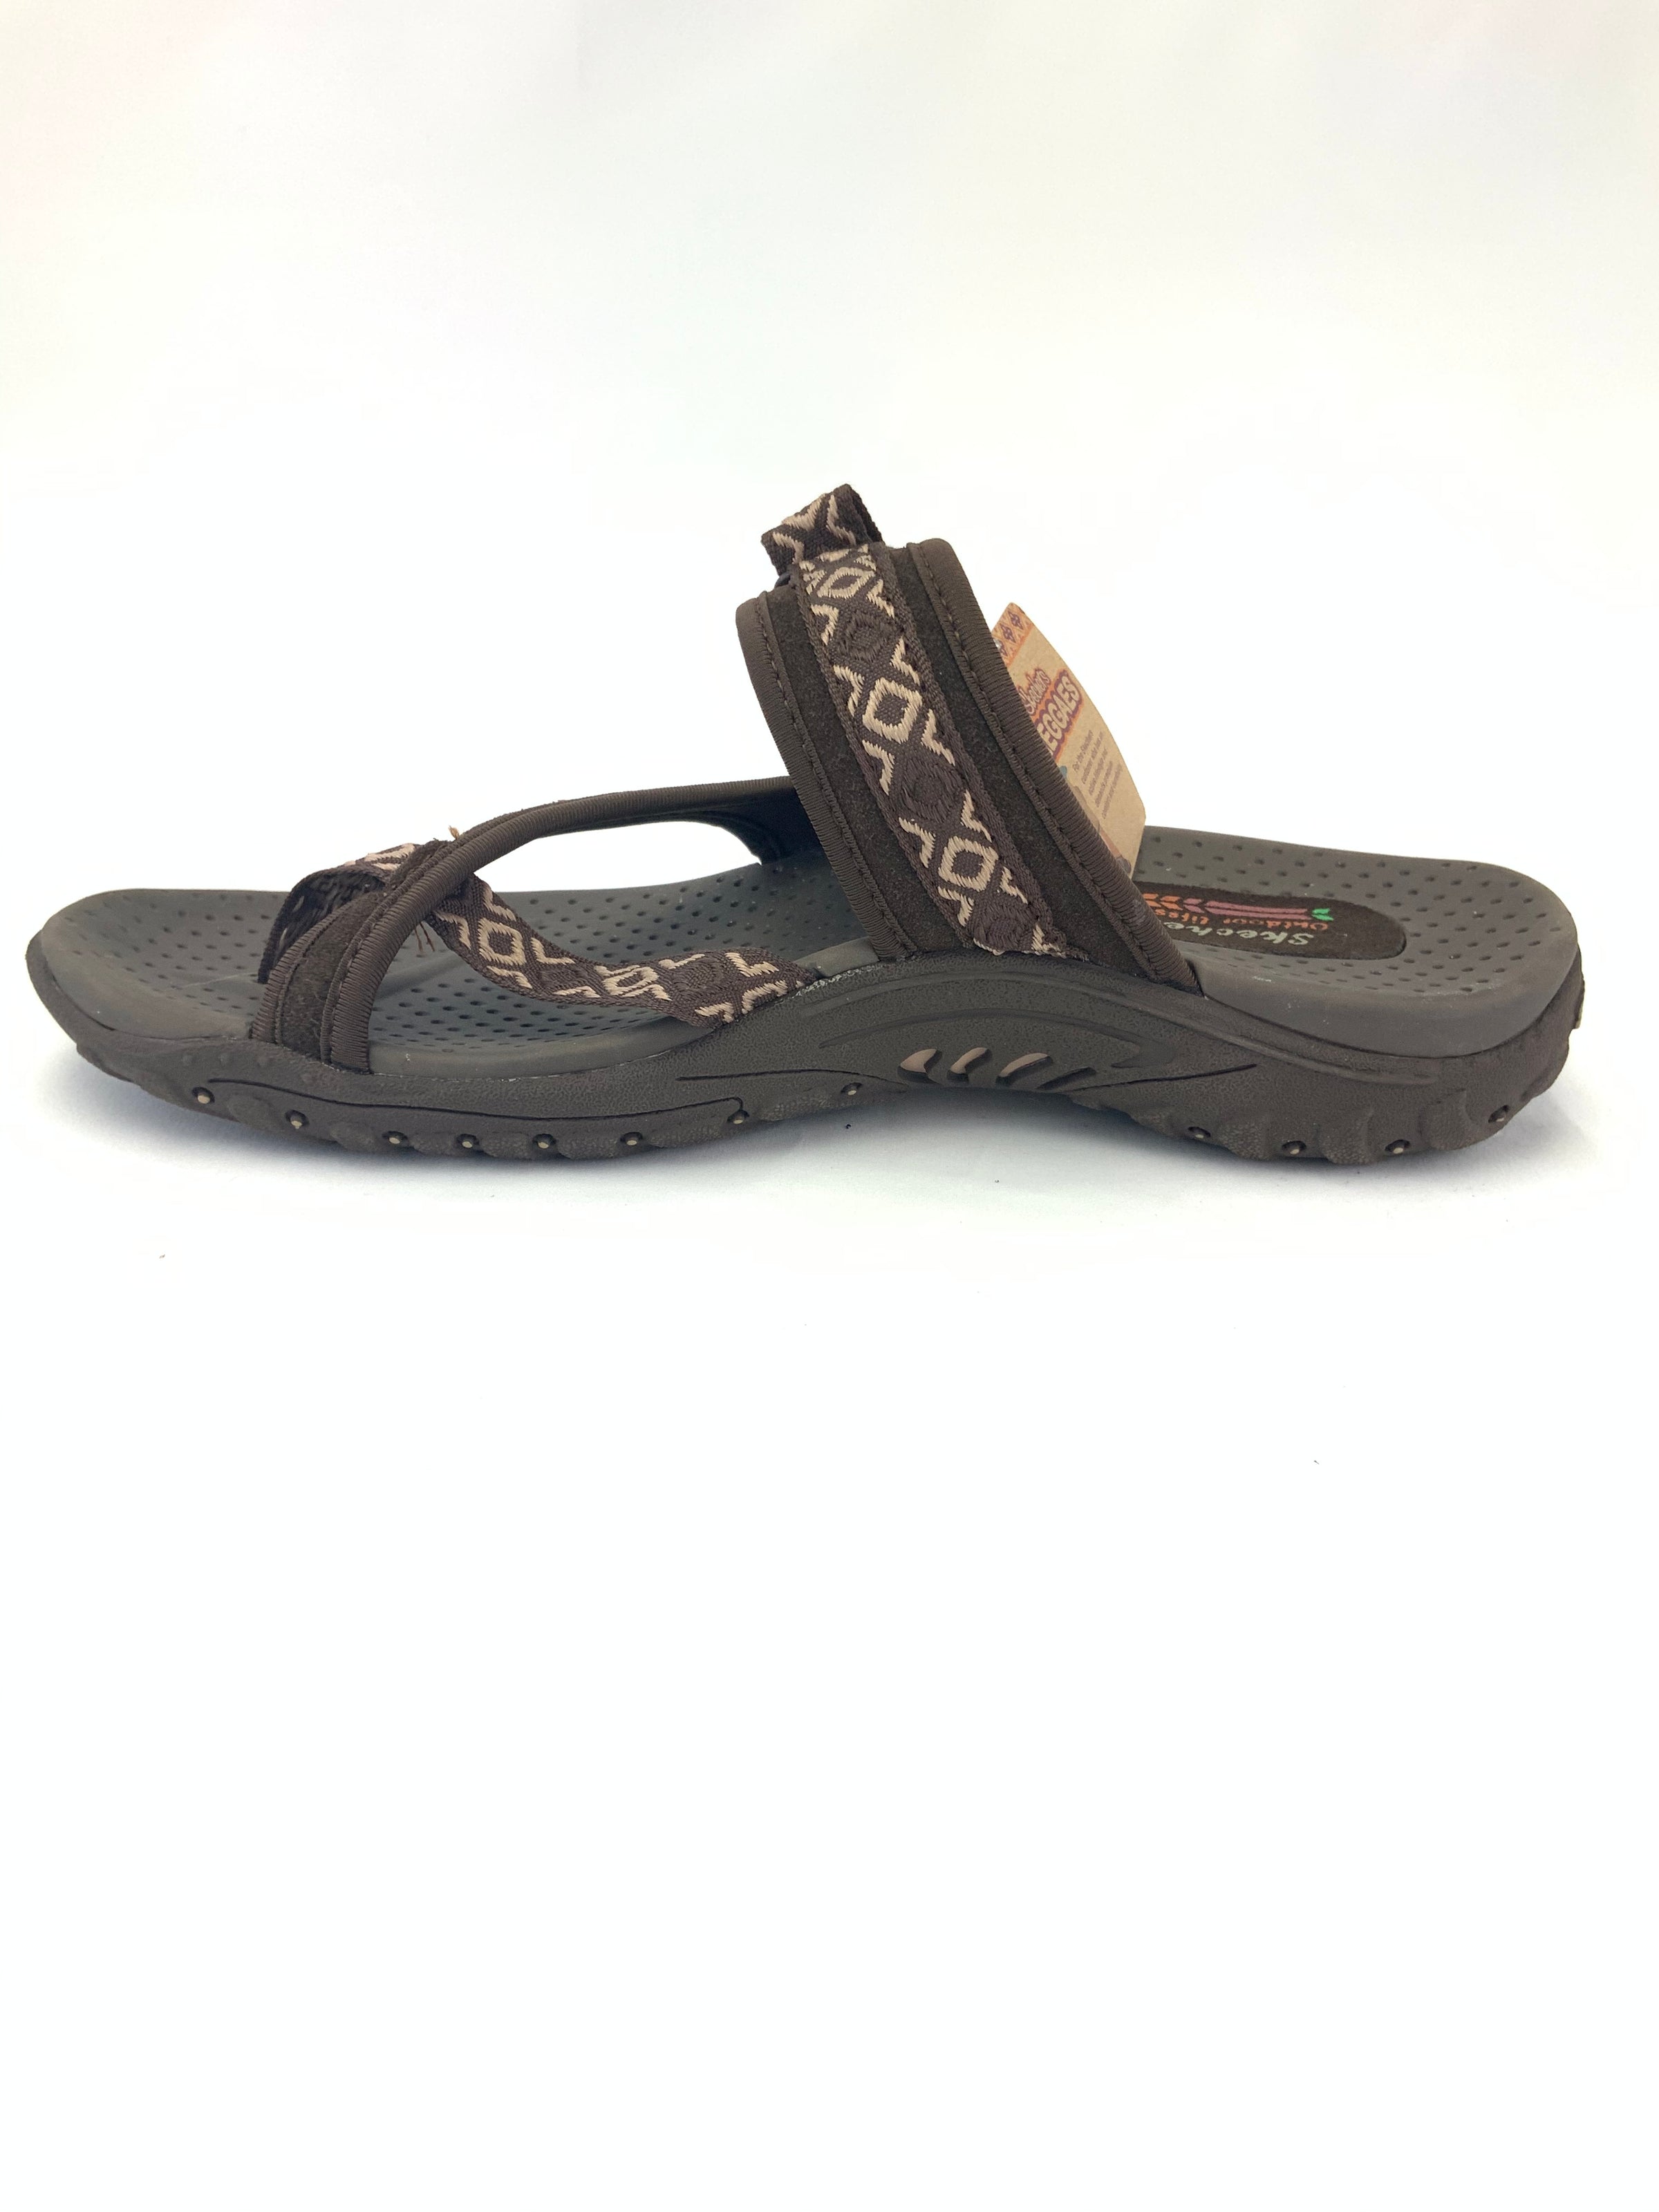 Skechers Reggaes Outdoor Lifestyle Sandals Size 9